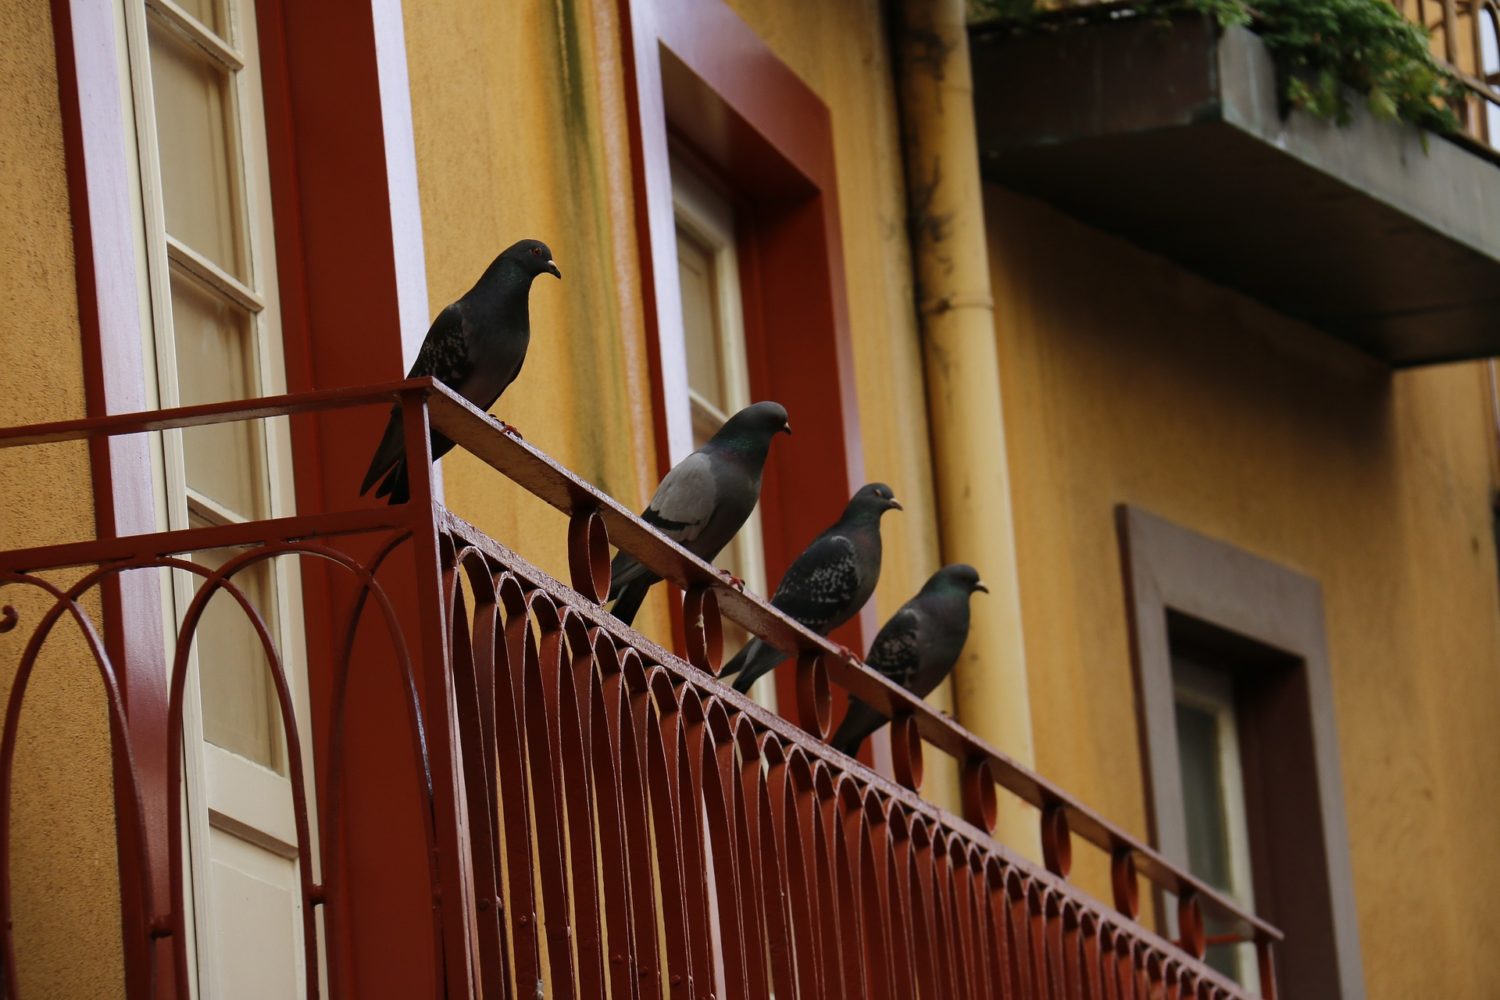 Four pigeons sitting on a balcony